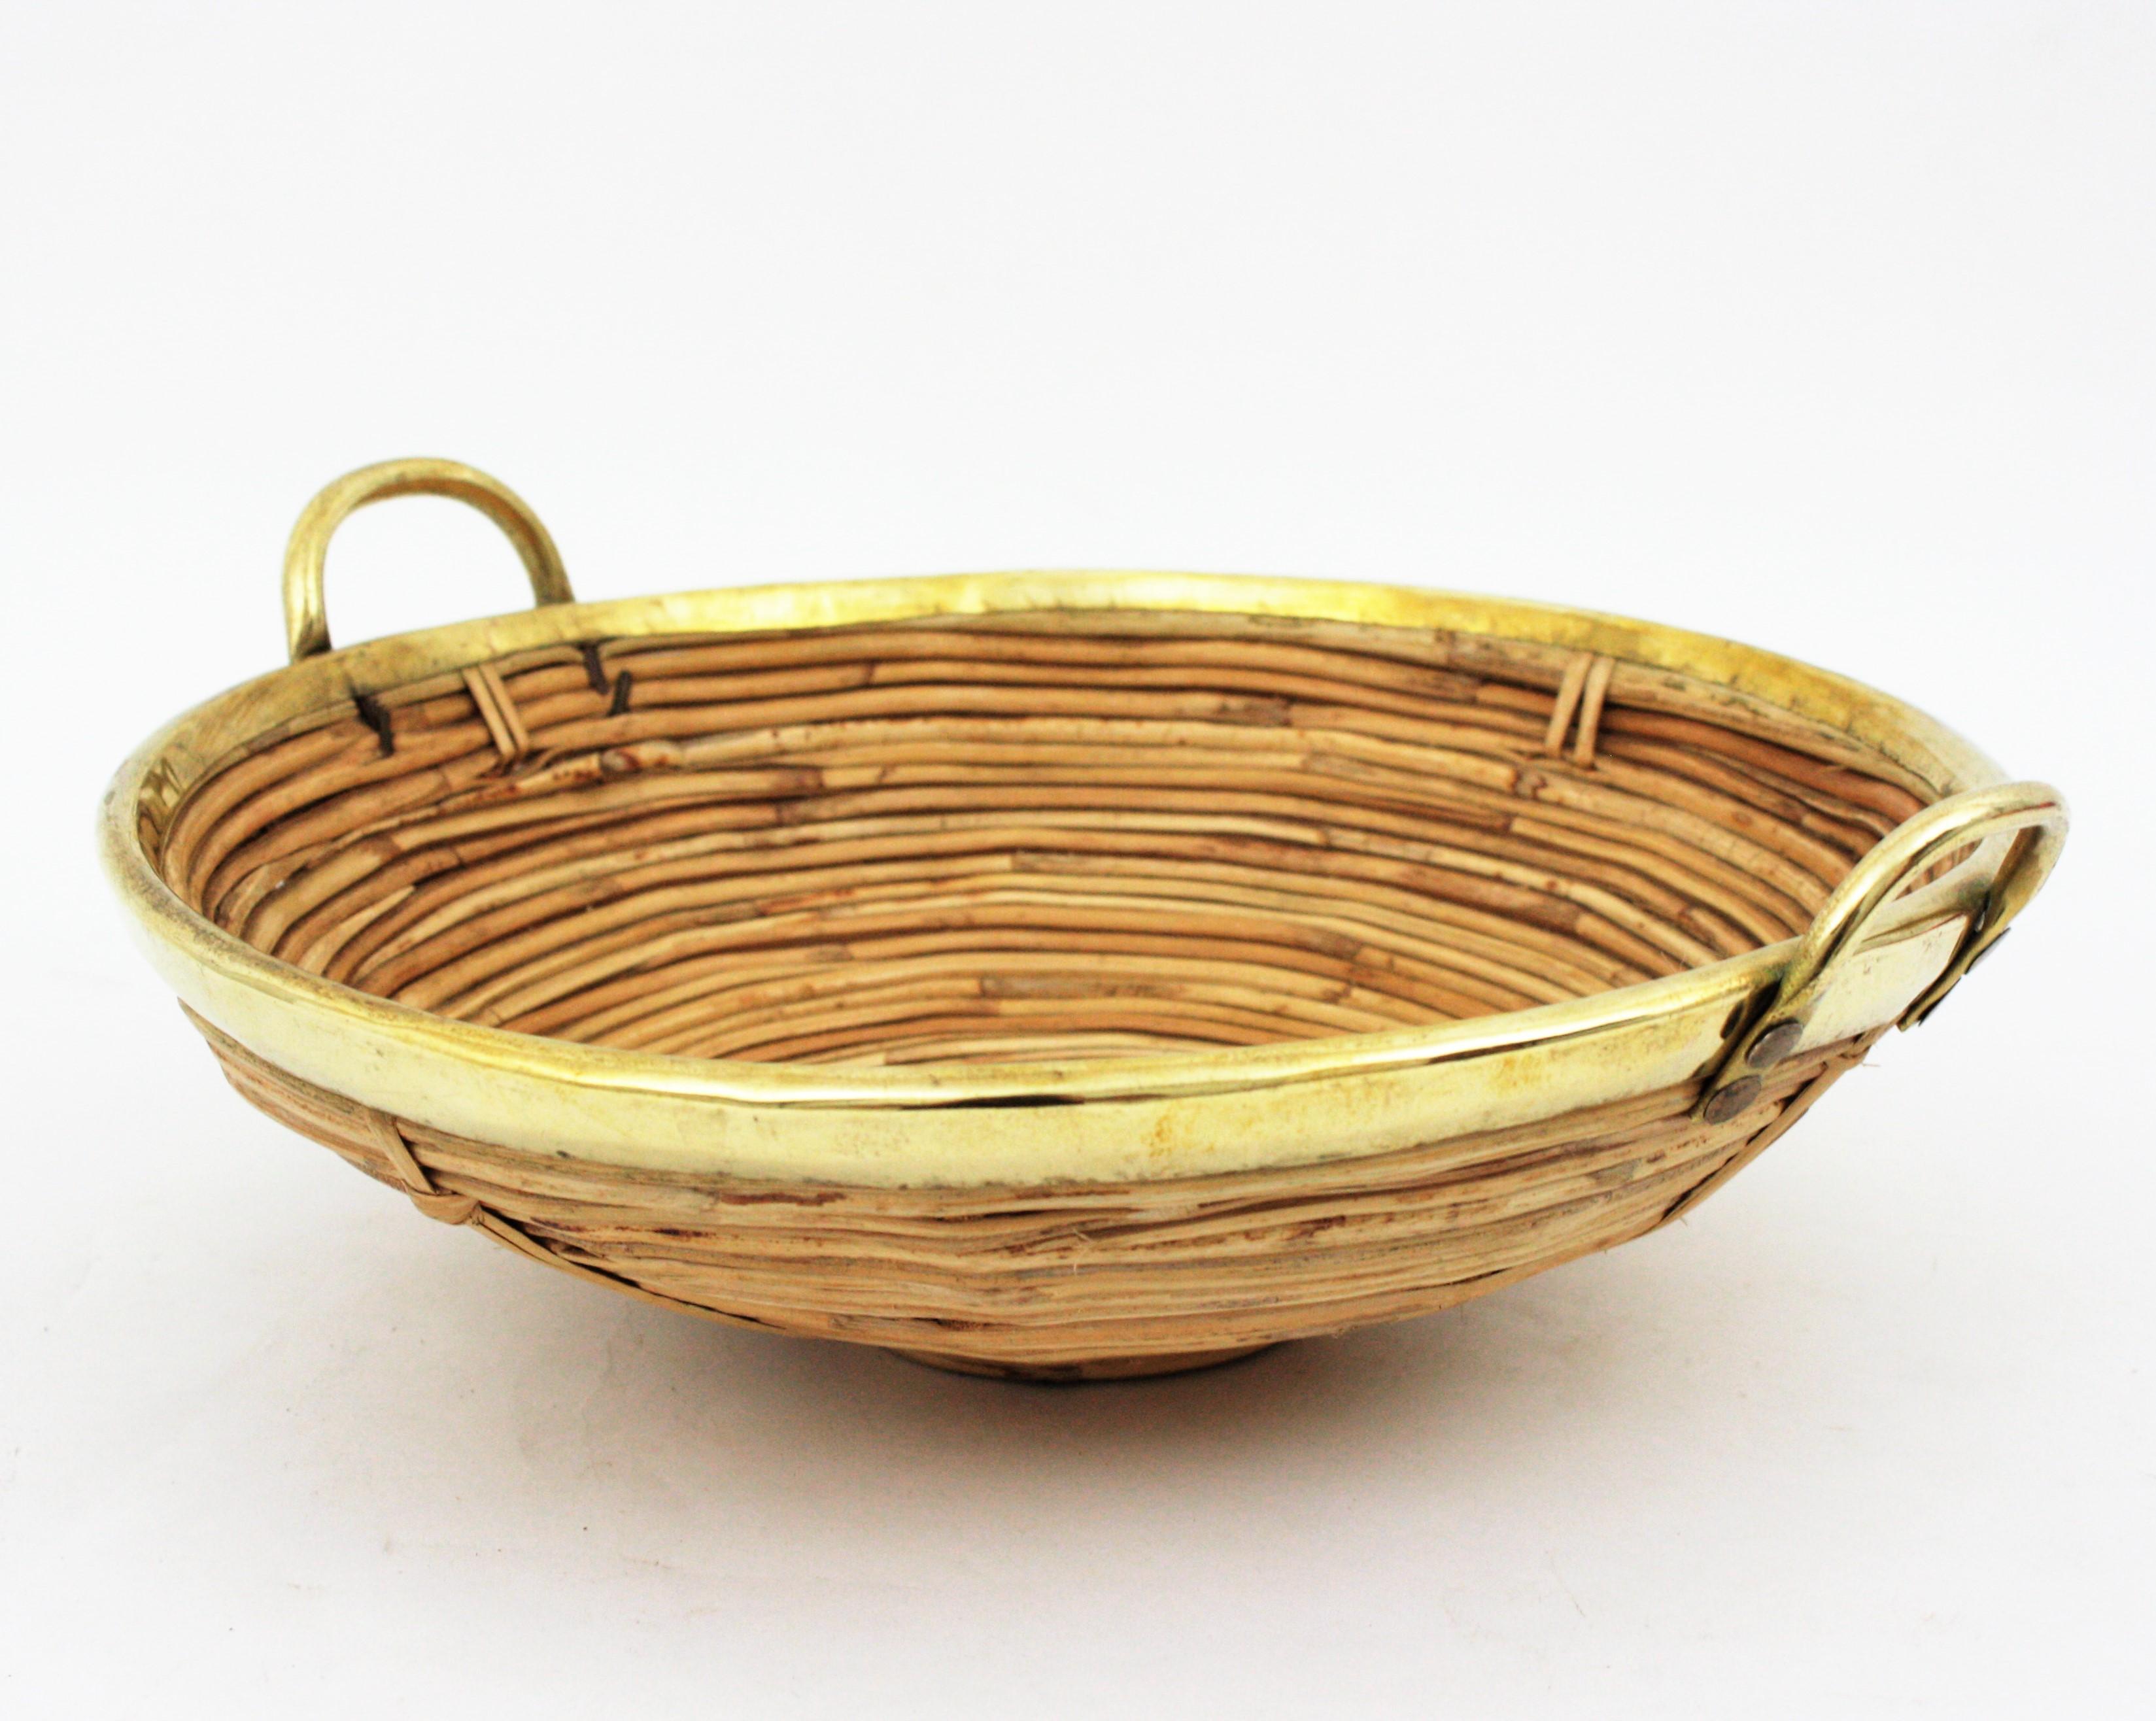 Rattan and Brass Italian Centerpiece Basket with Handles, 1970s For Sale 7